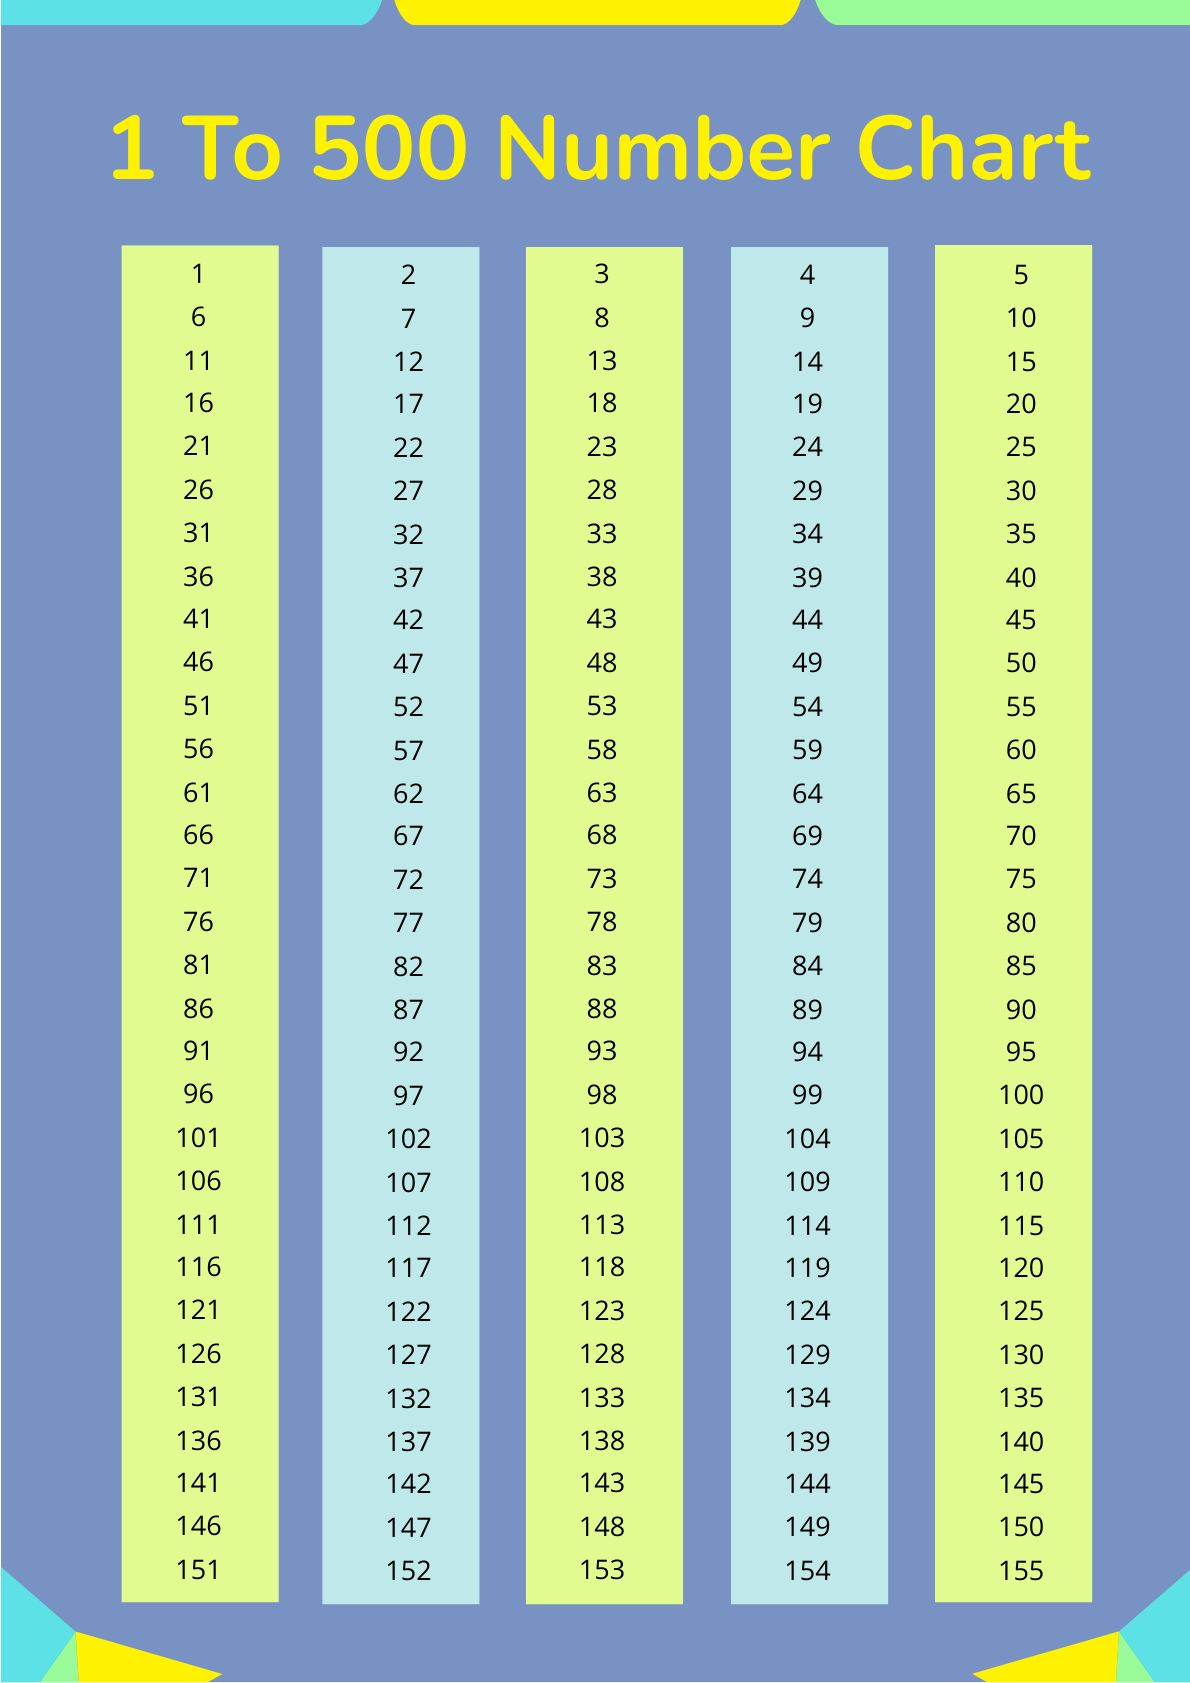 1 To 500 Number Chart in PDF, Illustrator